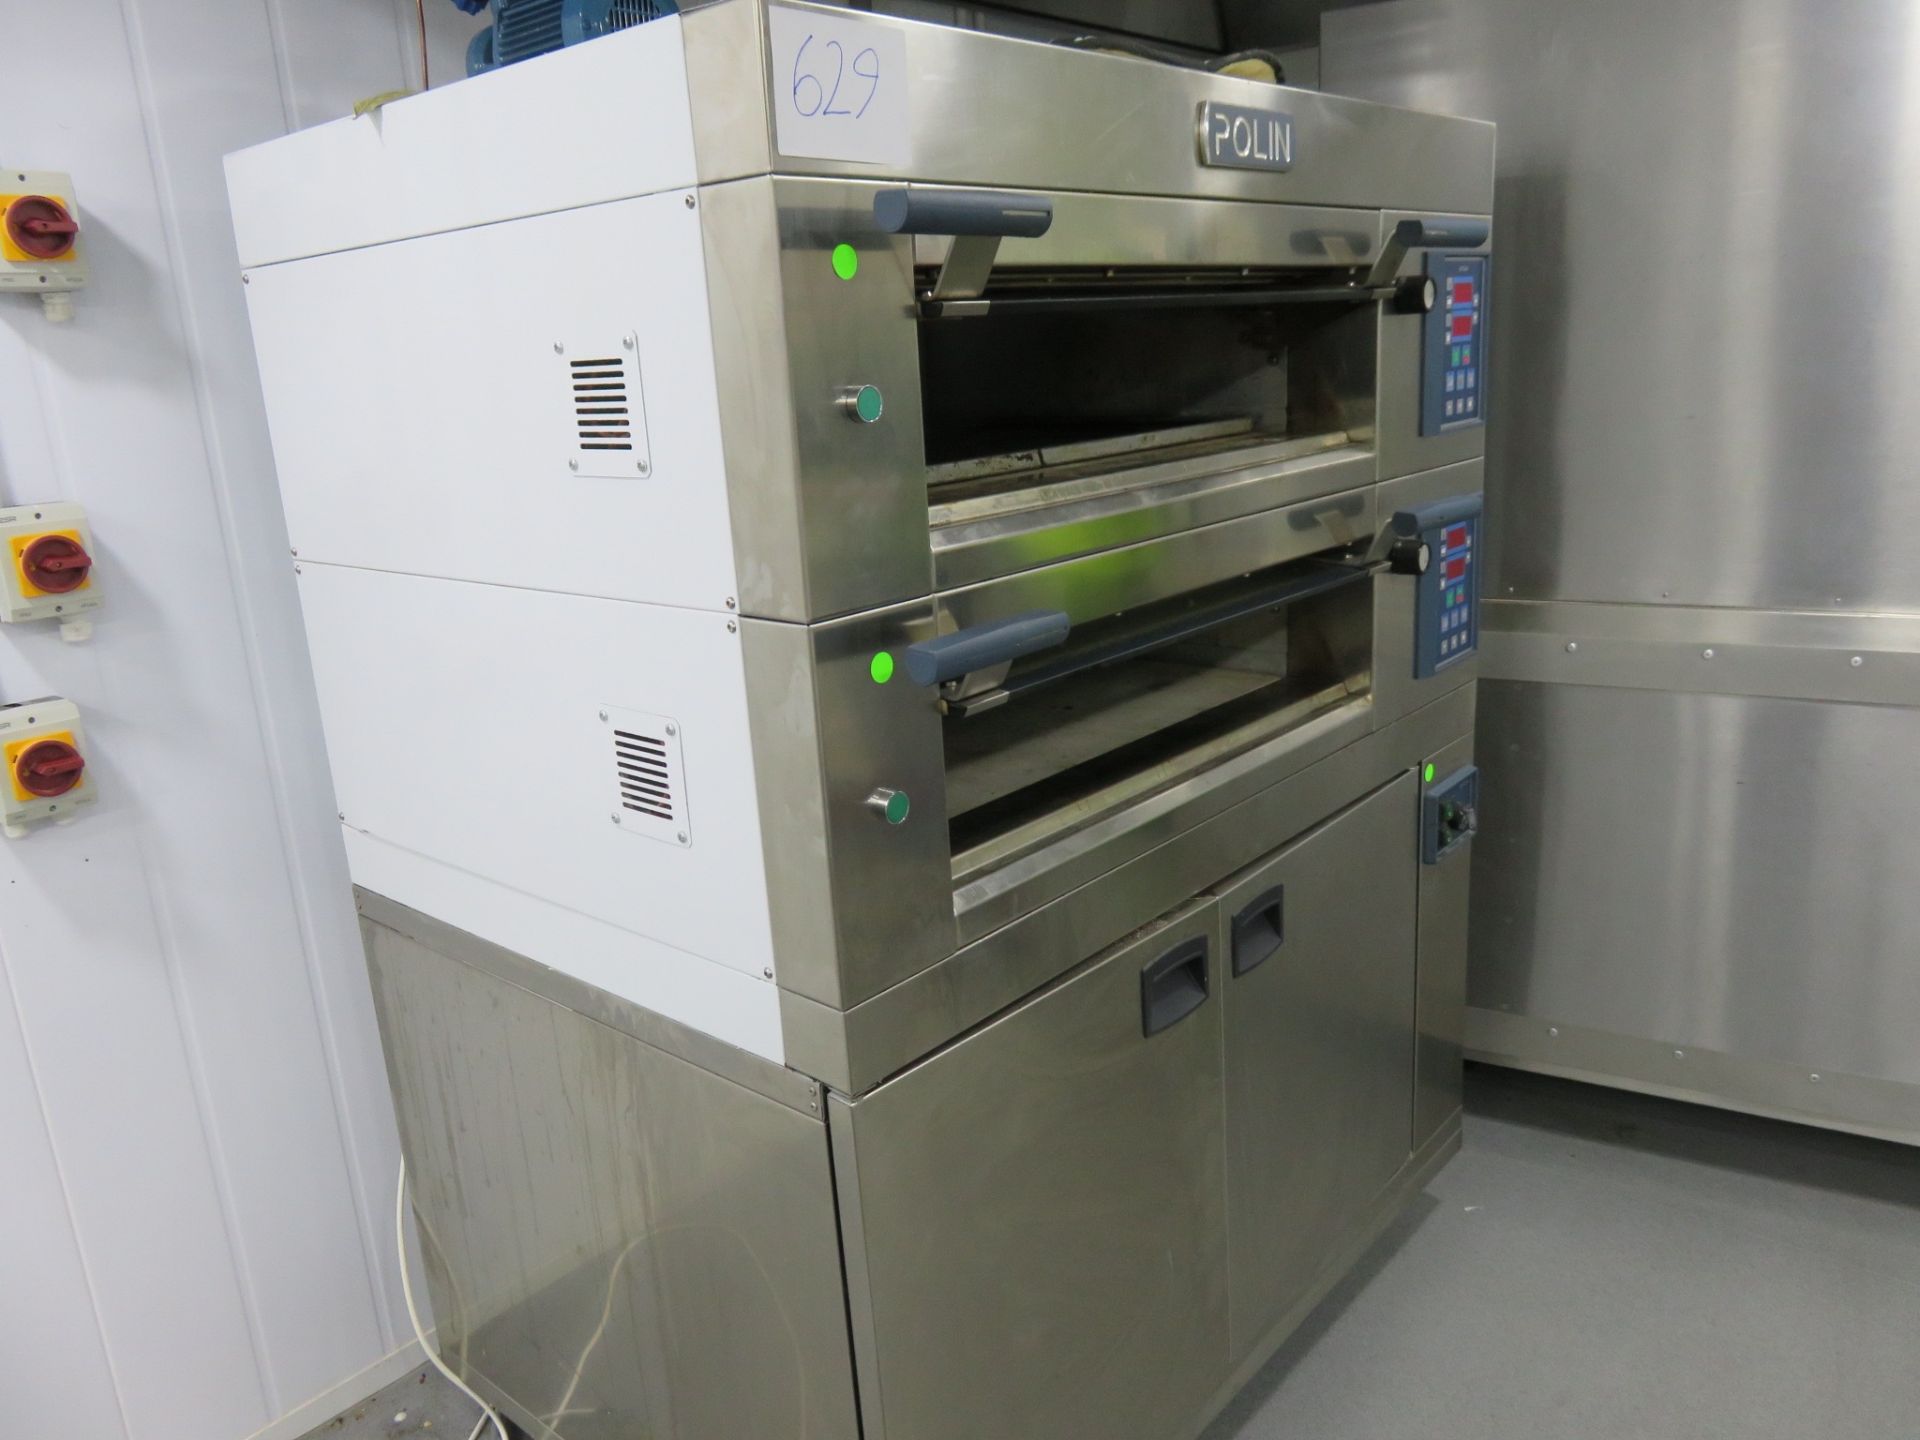 Test Kitchen Stonebake Polin 2 Deck Oven. Complete with steam. 2010 Cams. Lift out charge £60 - Bild 3 aus 3